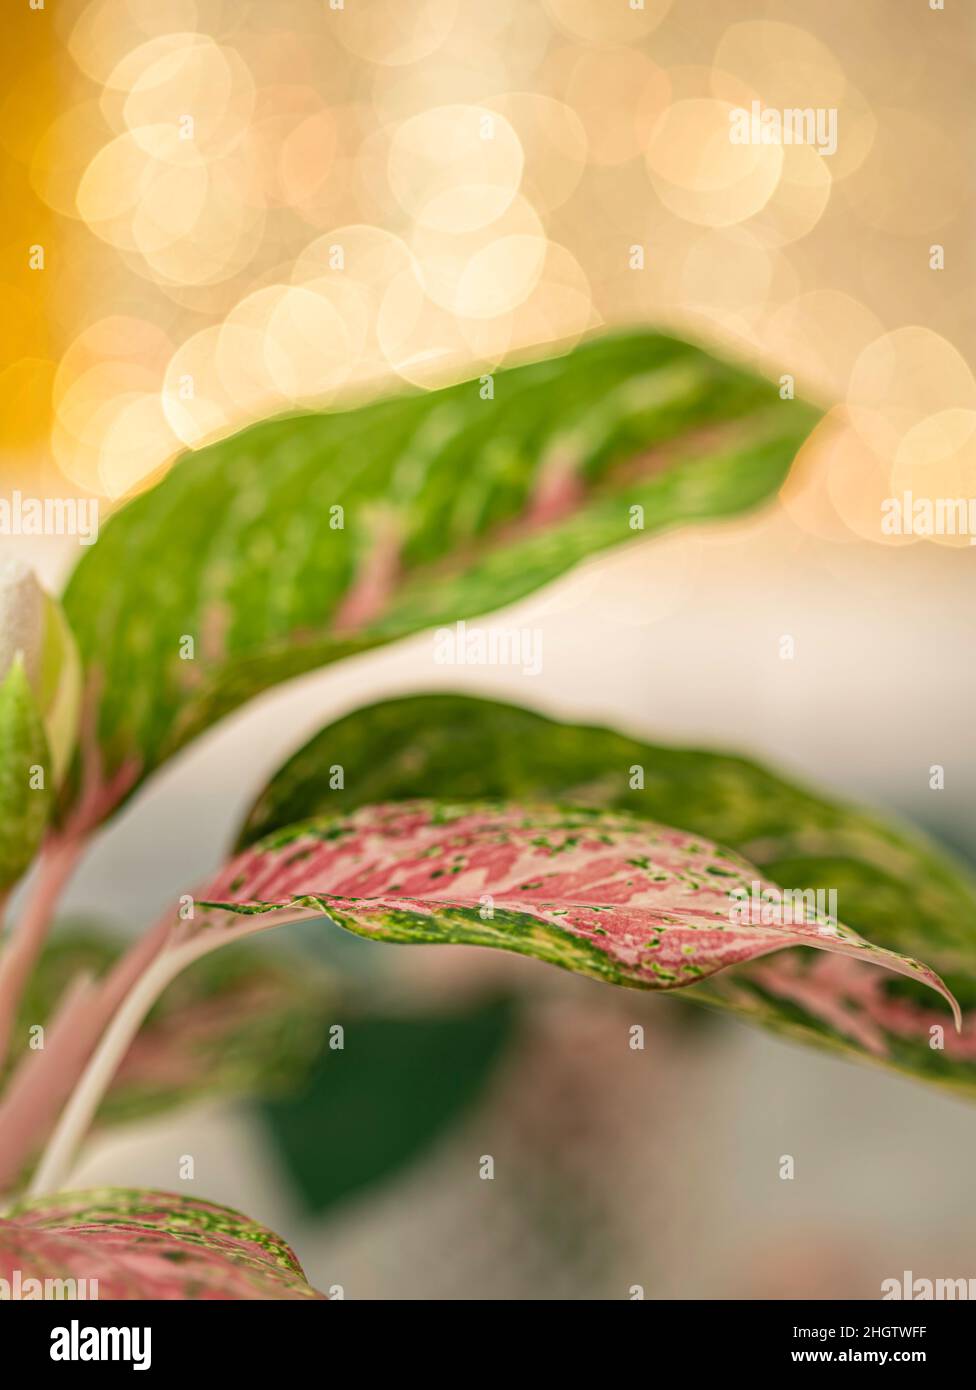 Aglaonema, houseplant. Aglaonema plant has green-pink-red-yellow striped, green border and water drops. Selective focus Stock Photo